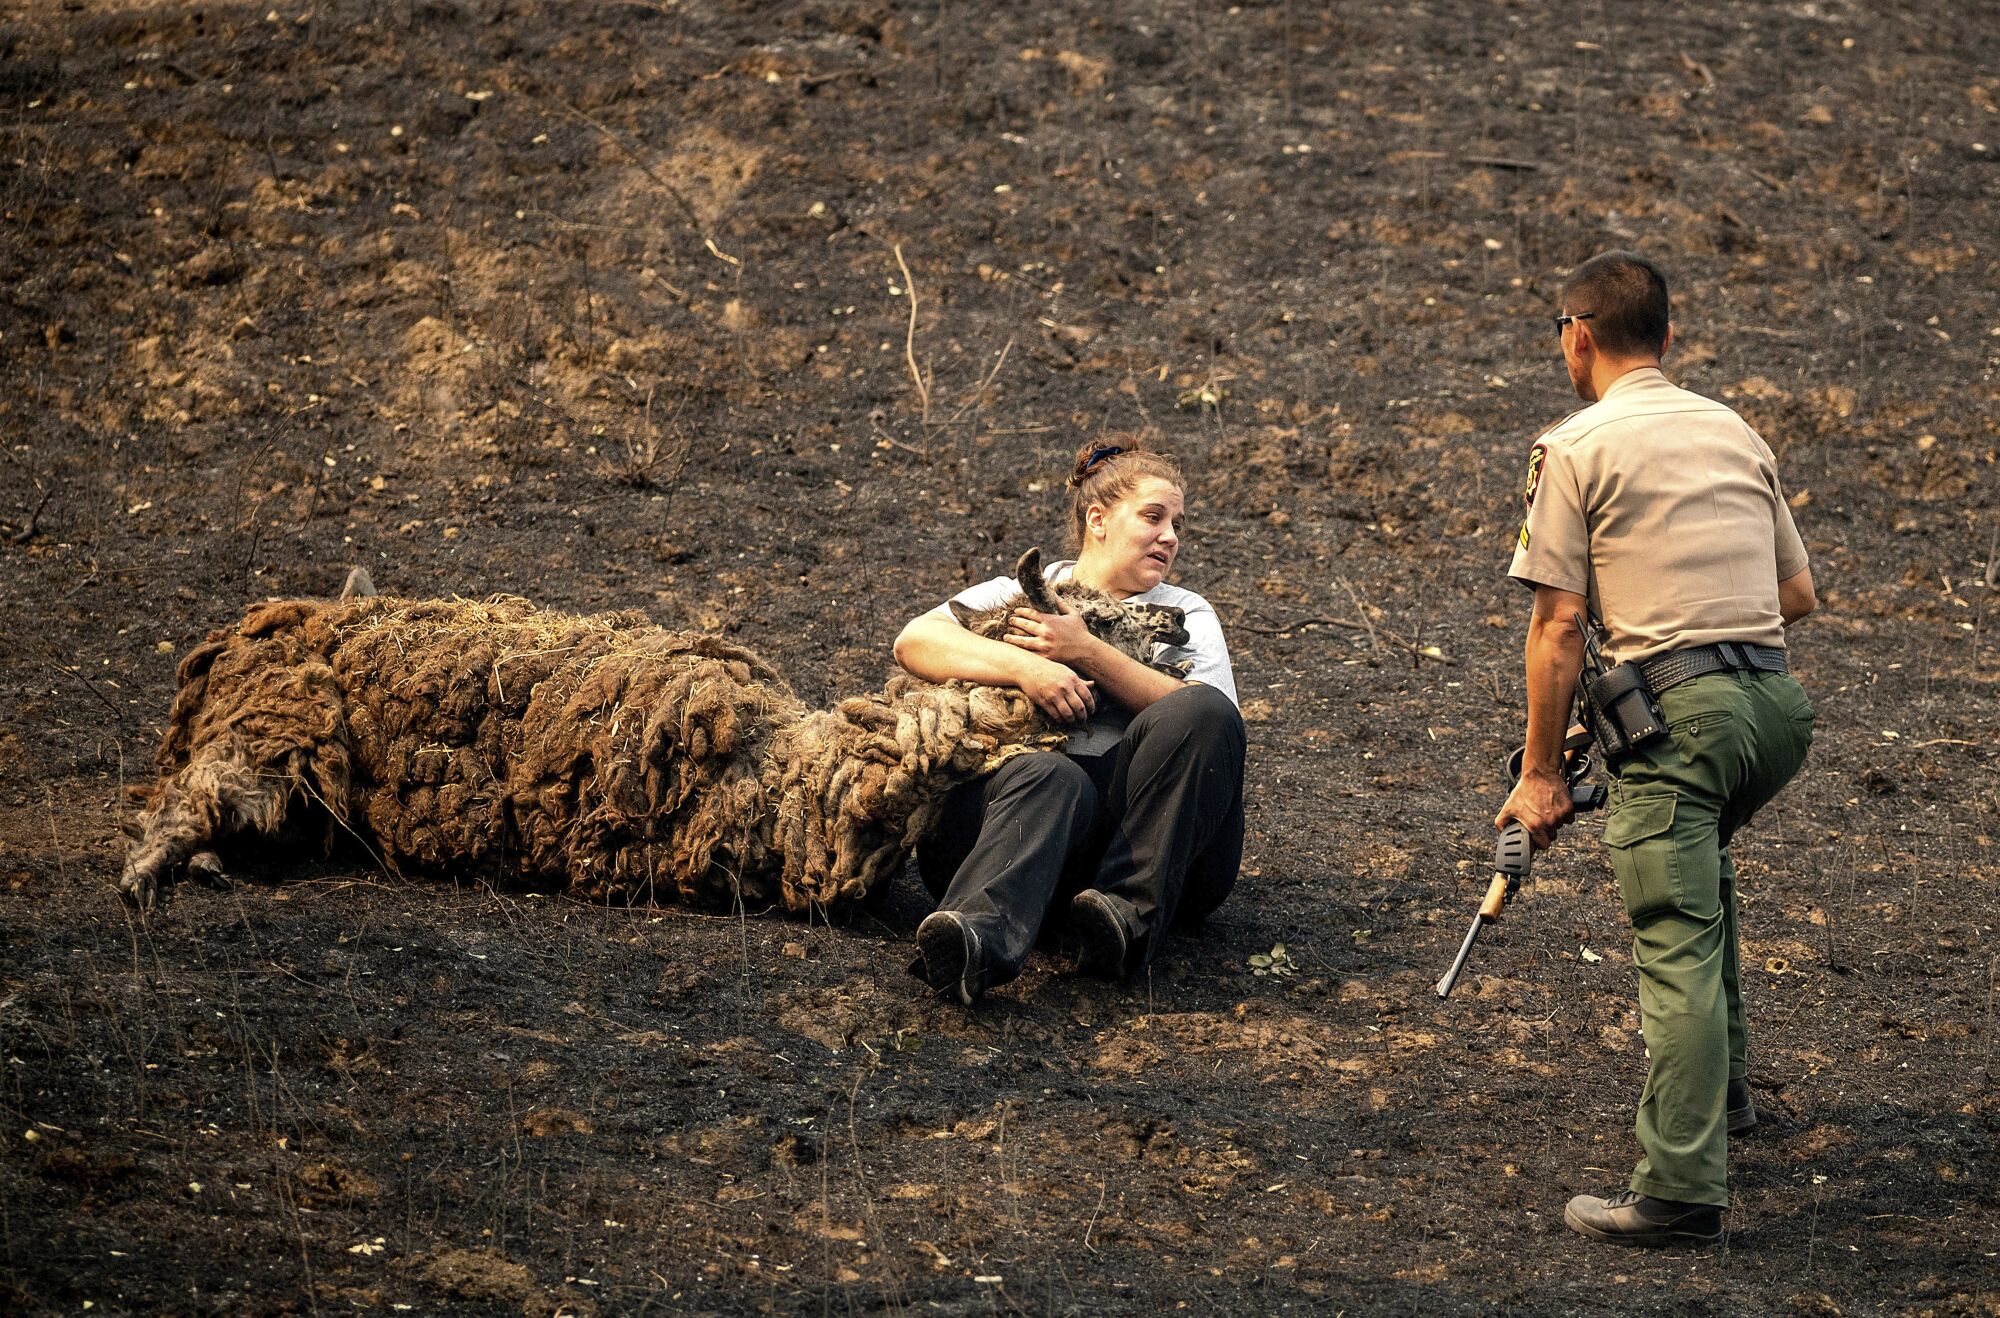 Veterinary technician Brianna Jeter comforts a llama injured in a wildfire in Vacaville, Calif.